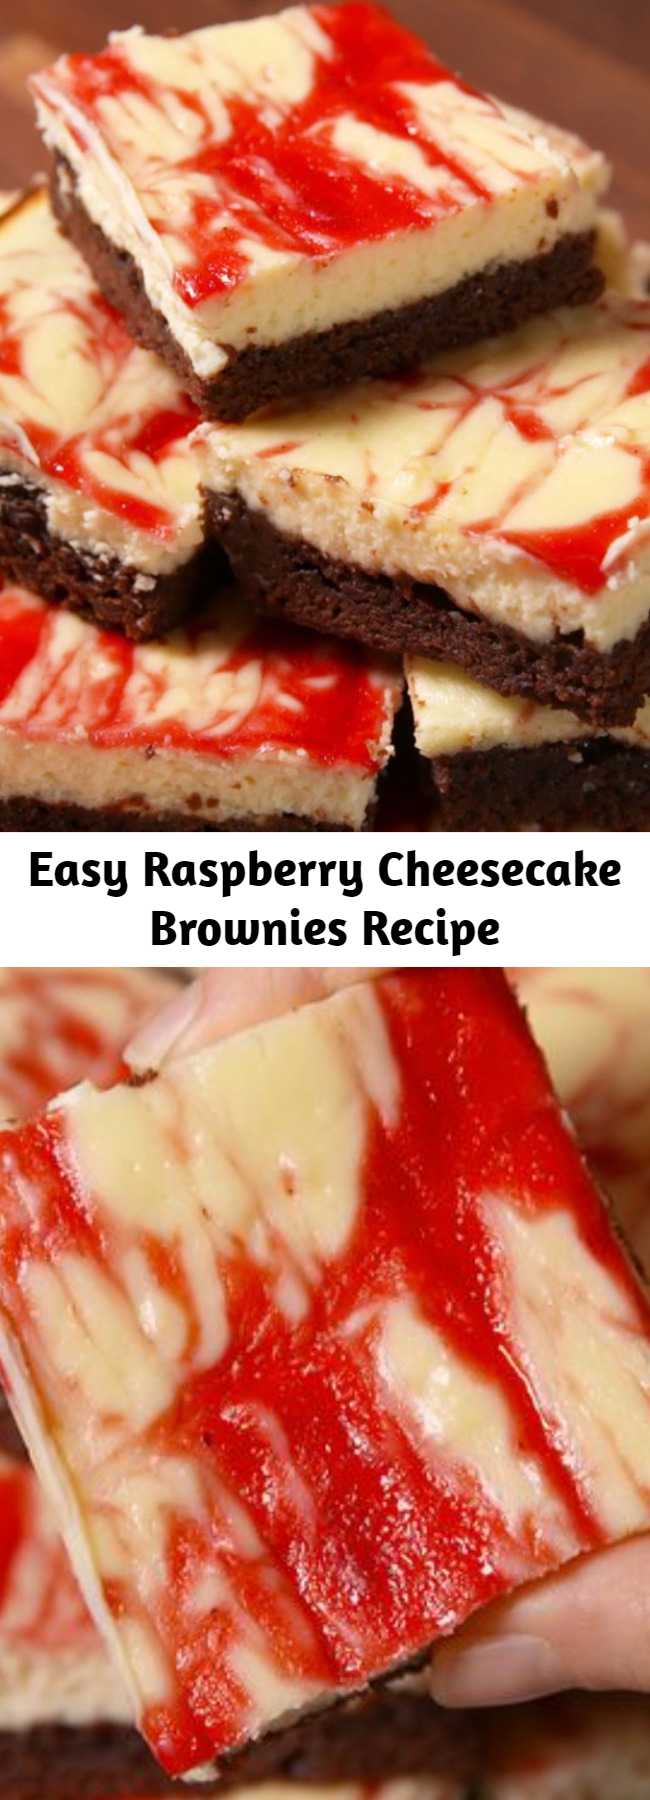 Easy Raspberry Cheesecake Brownies Recipe - Be a dessert superhero and make this easy recipe for raspberry cheesecake brownies.